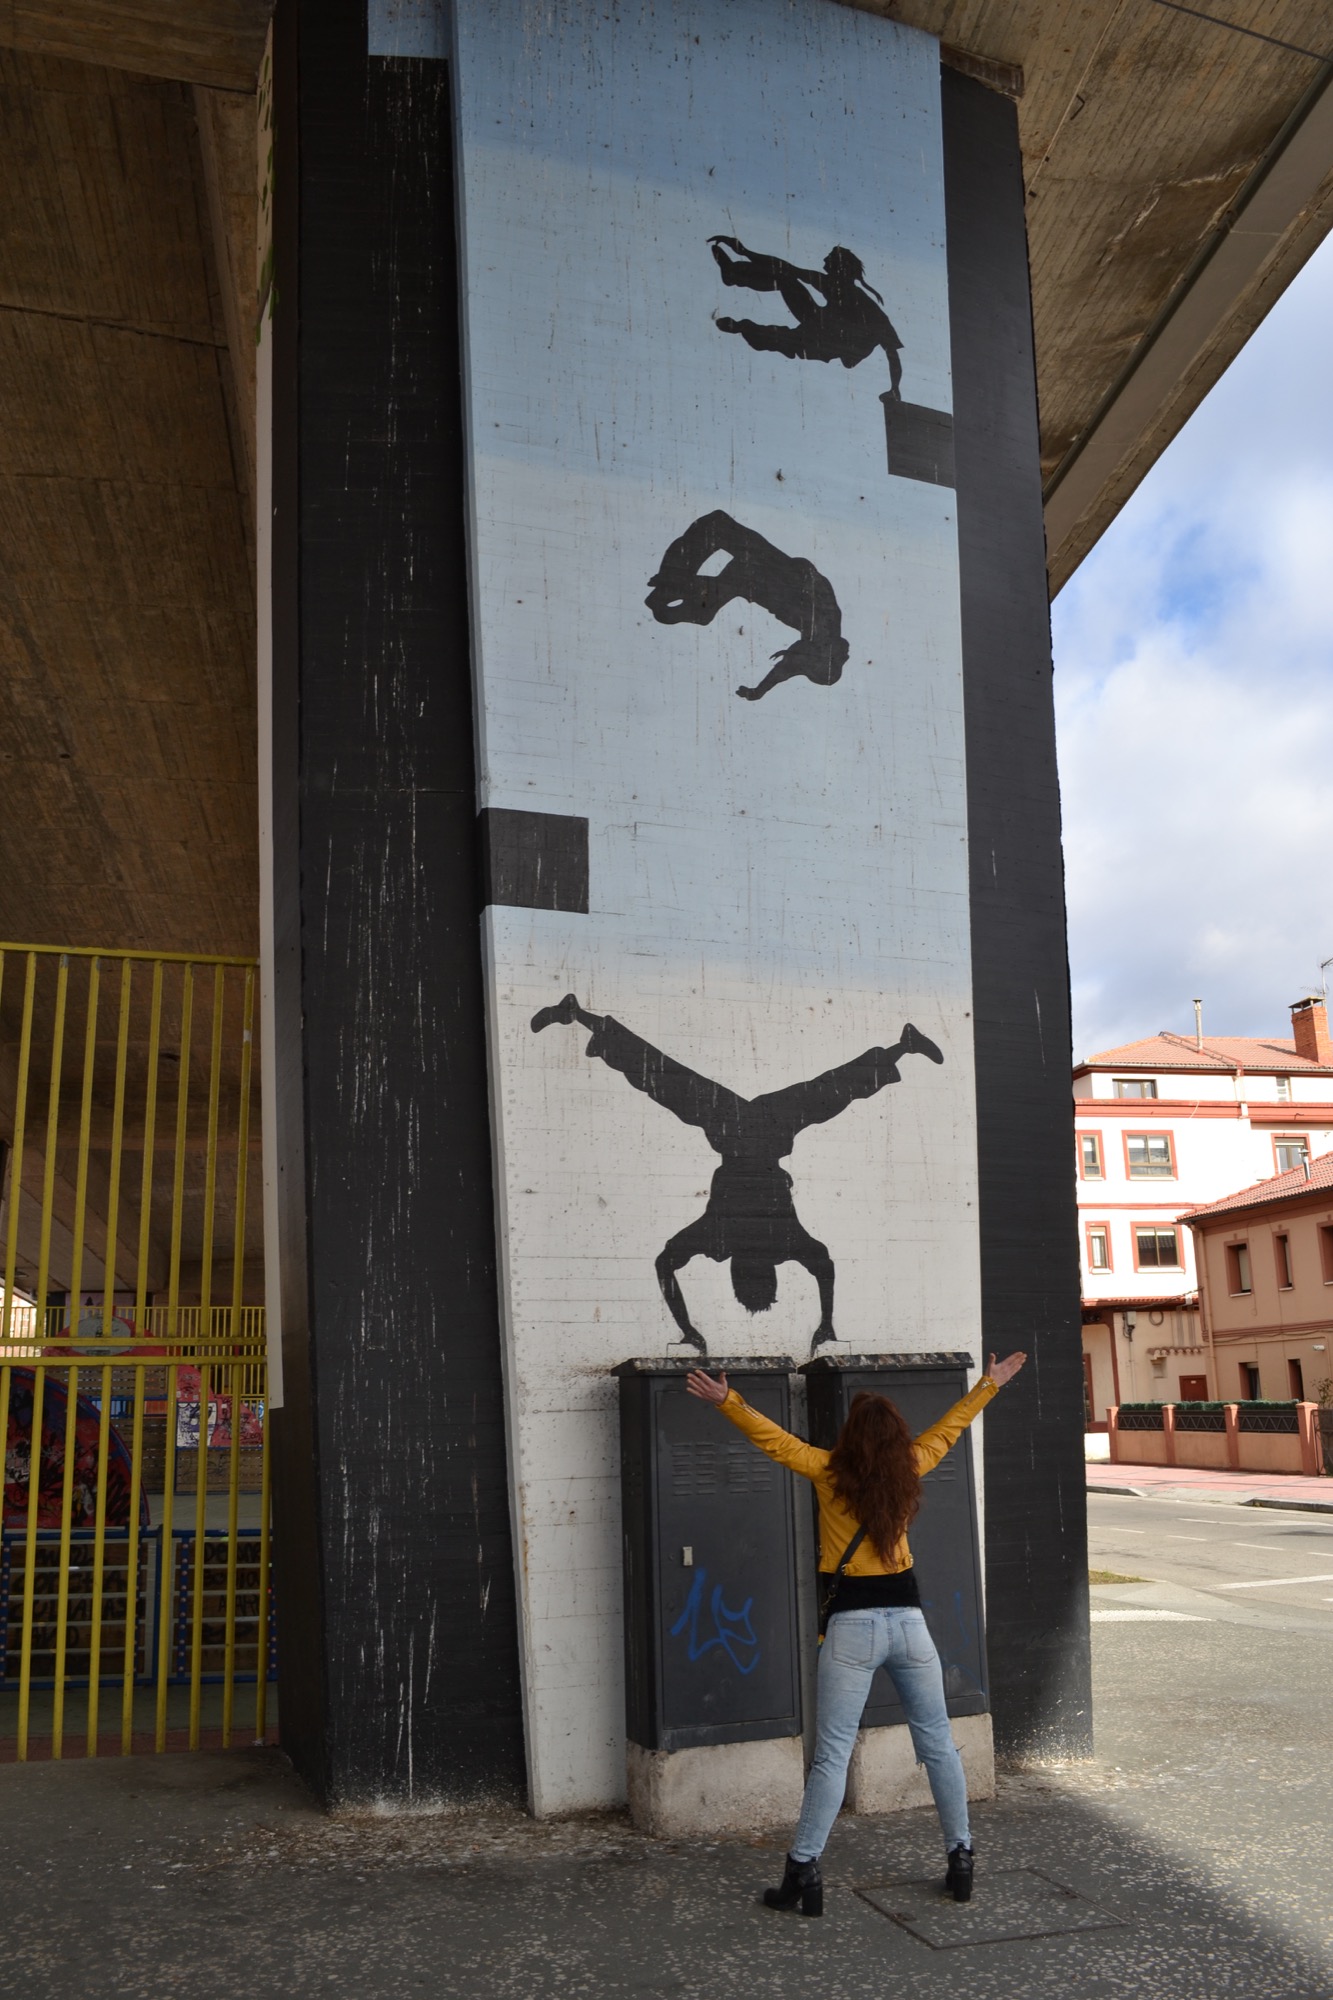 Graffiti 775 Parkour captured by ankarkzoo in Burgos Spain